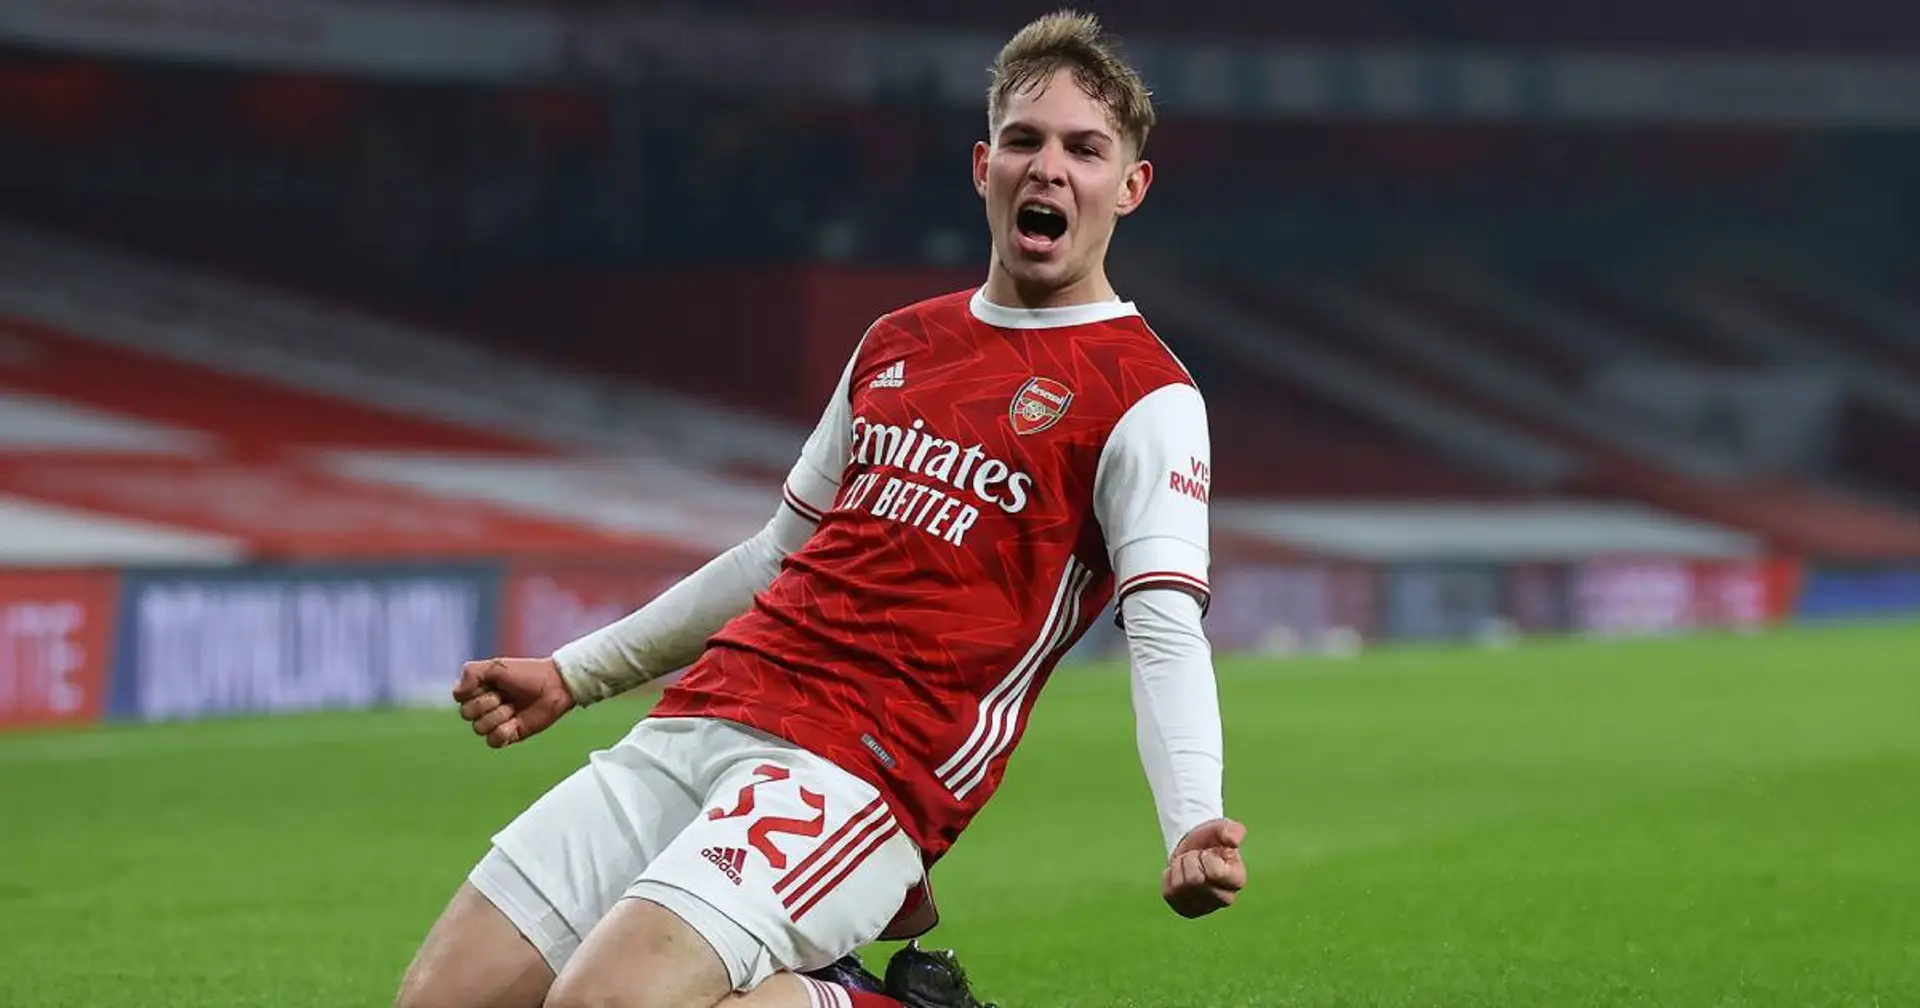 'He's a player who doesn't show fear': Arsenal great Thomas heaps praise on Smith Rowe